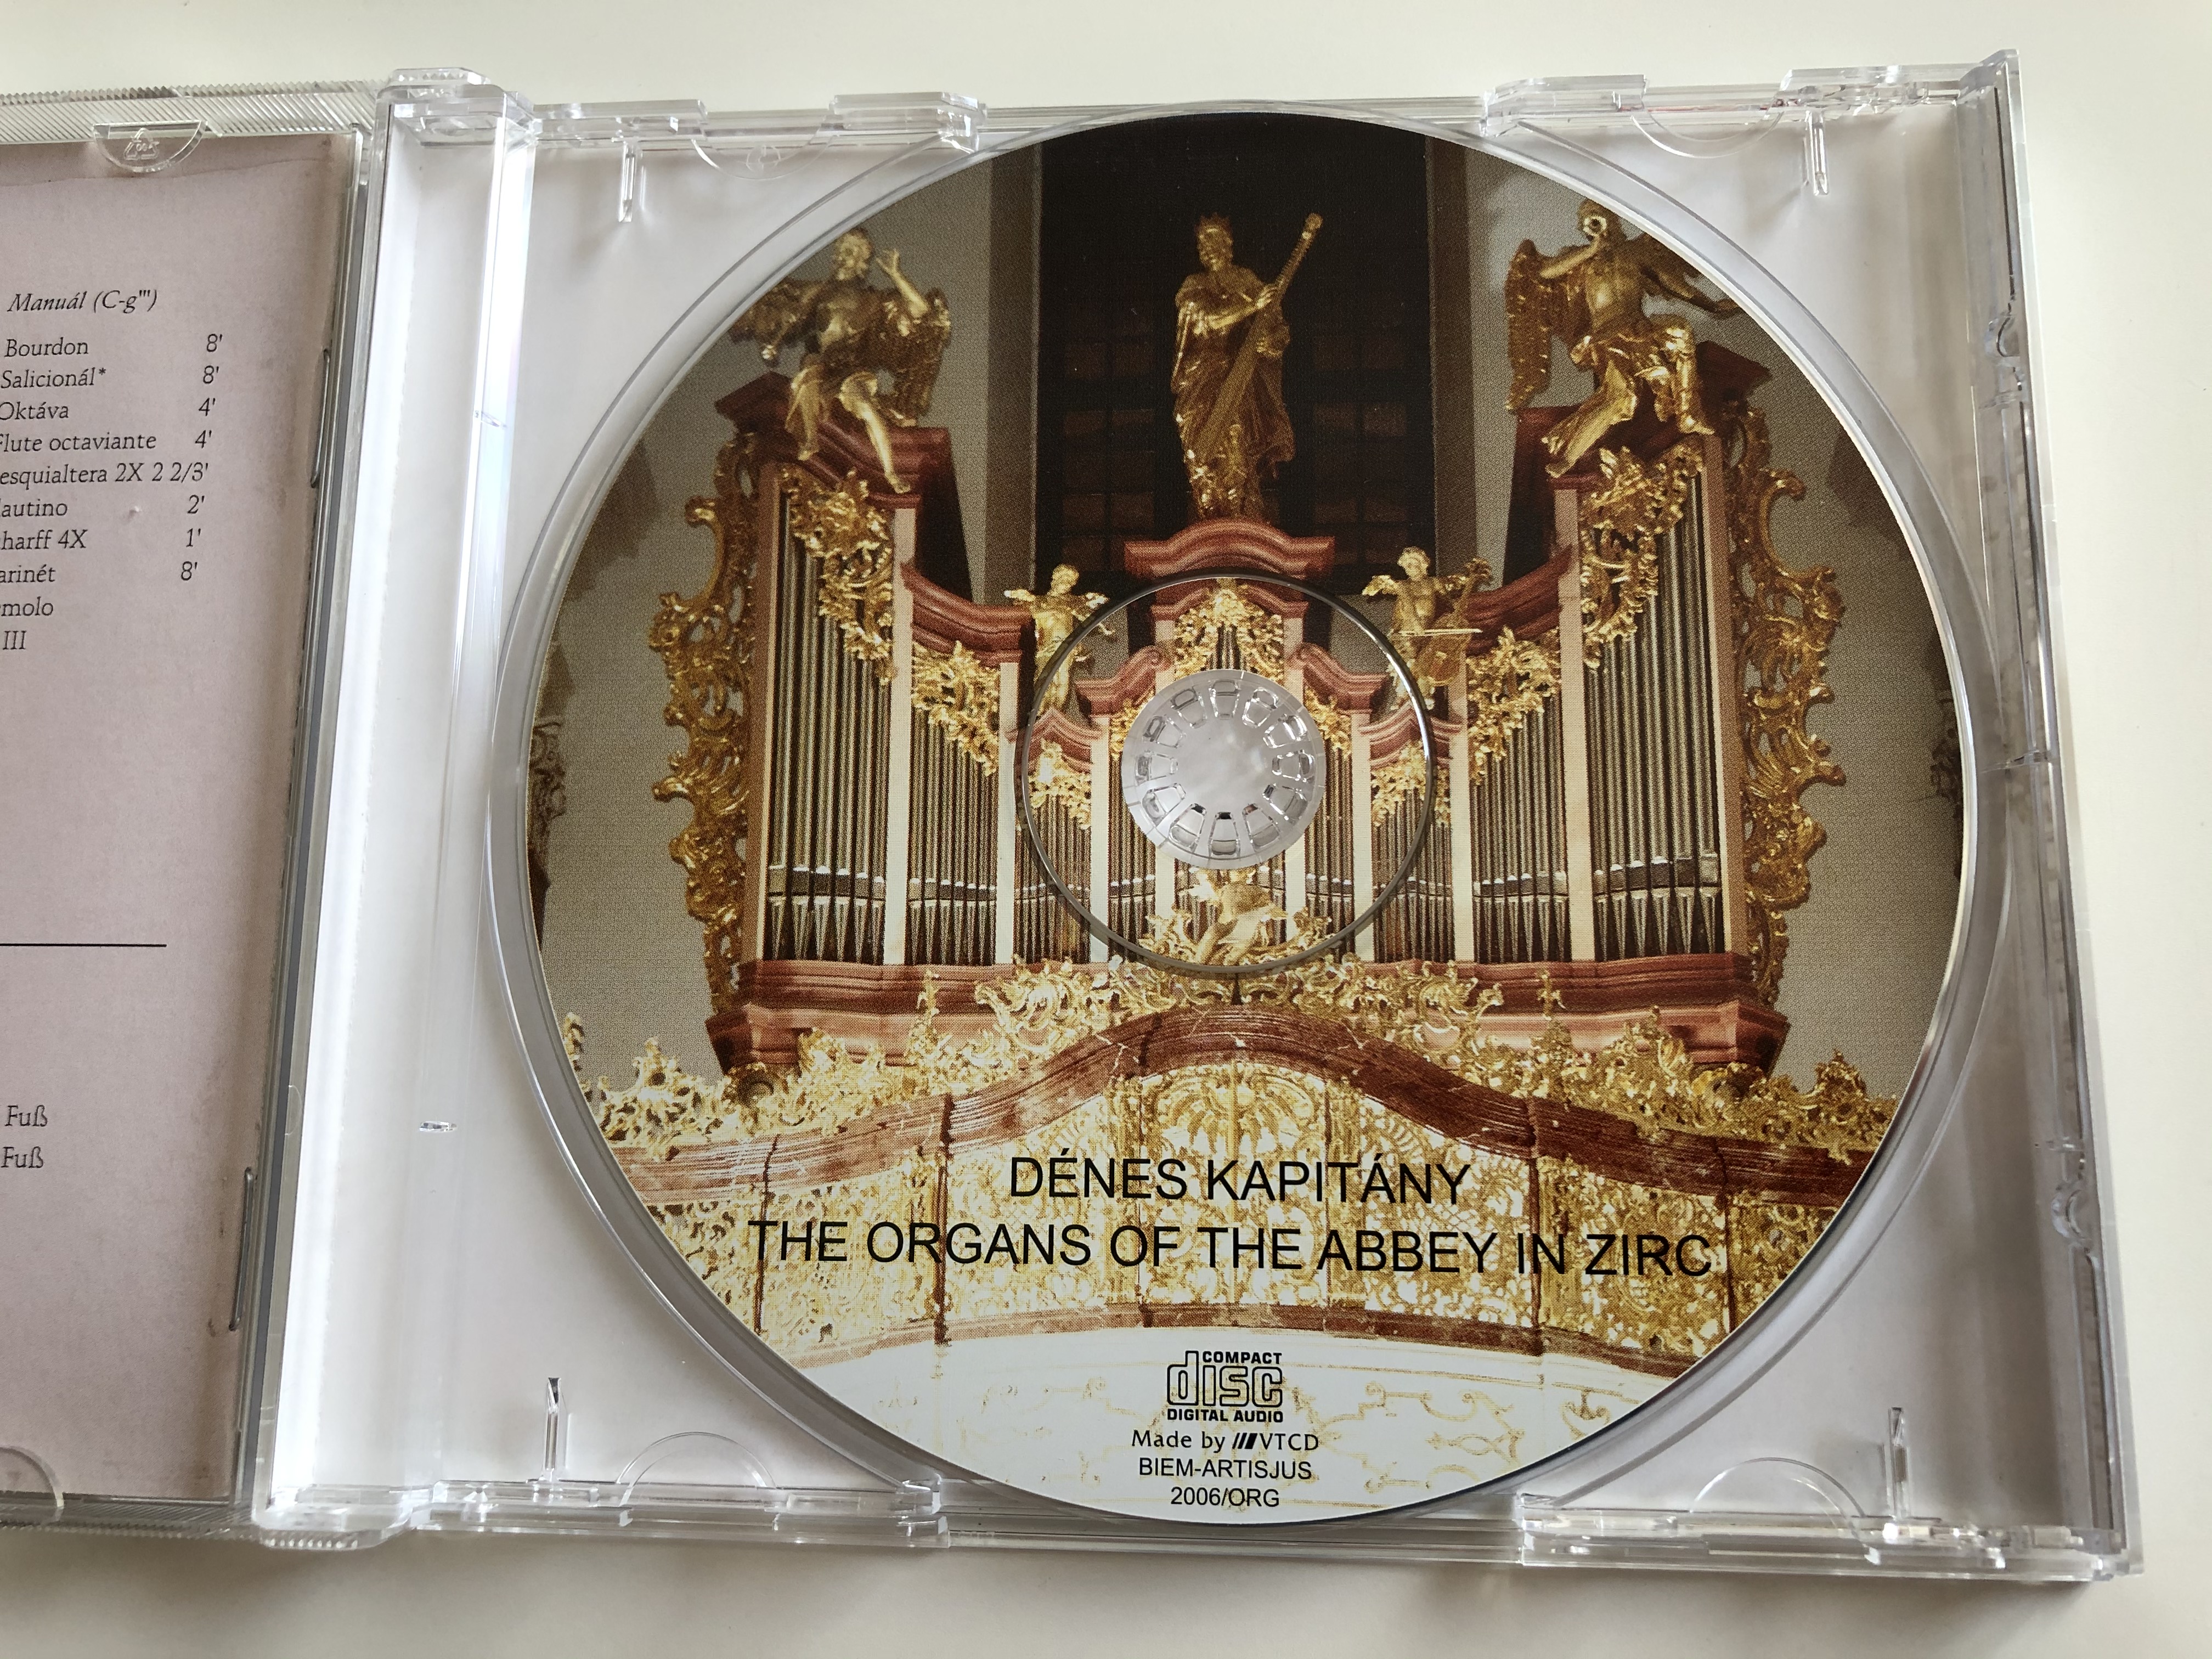 the-organs-of-the-abbey-in-zirc-playes-by-denes-kapitany-audio-cd-2006-2006org-16-.jpg